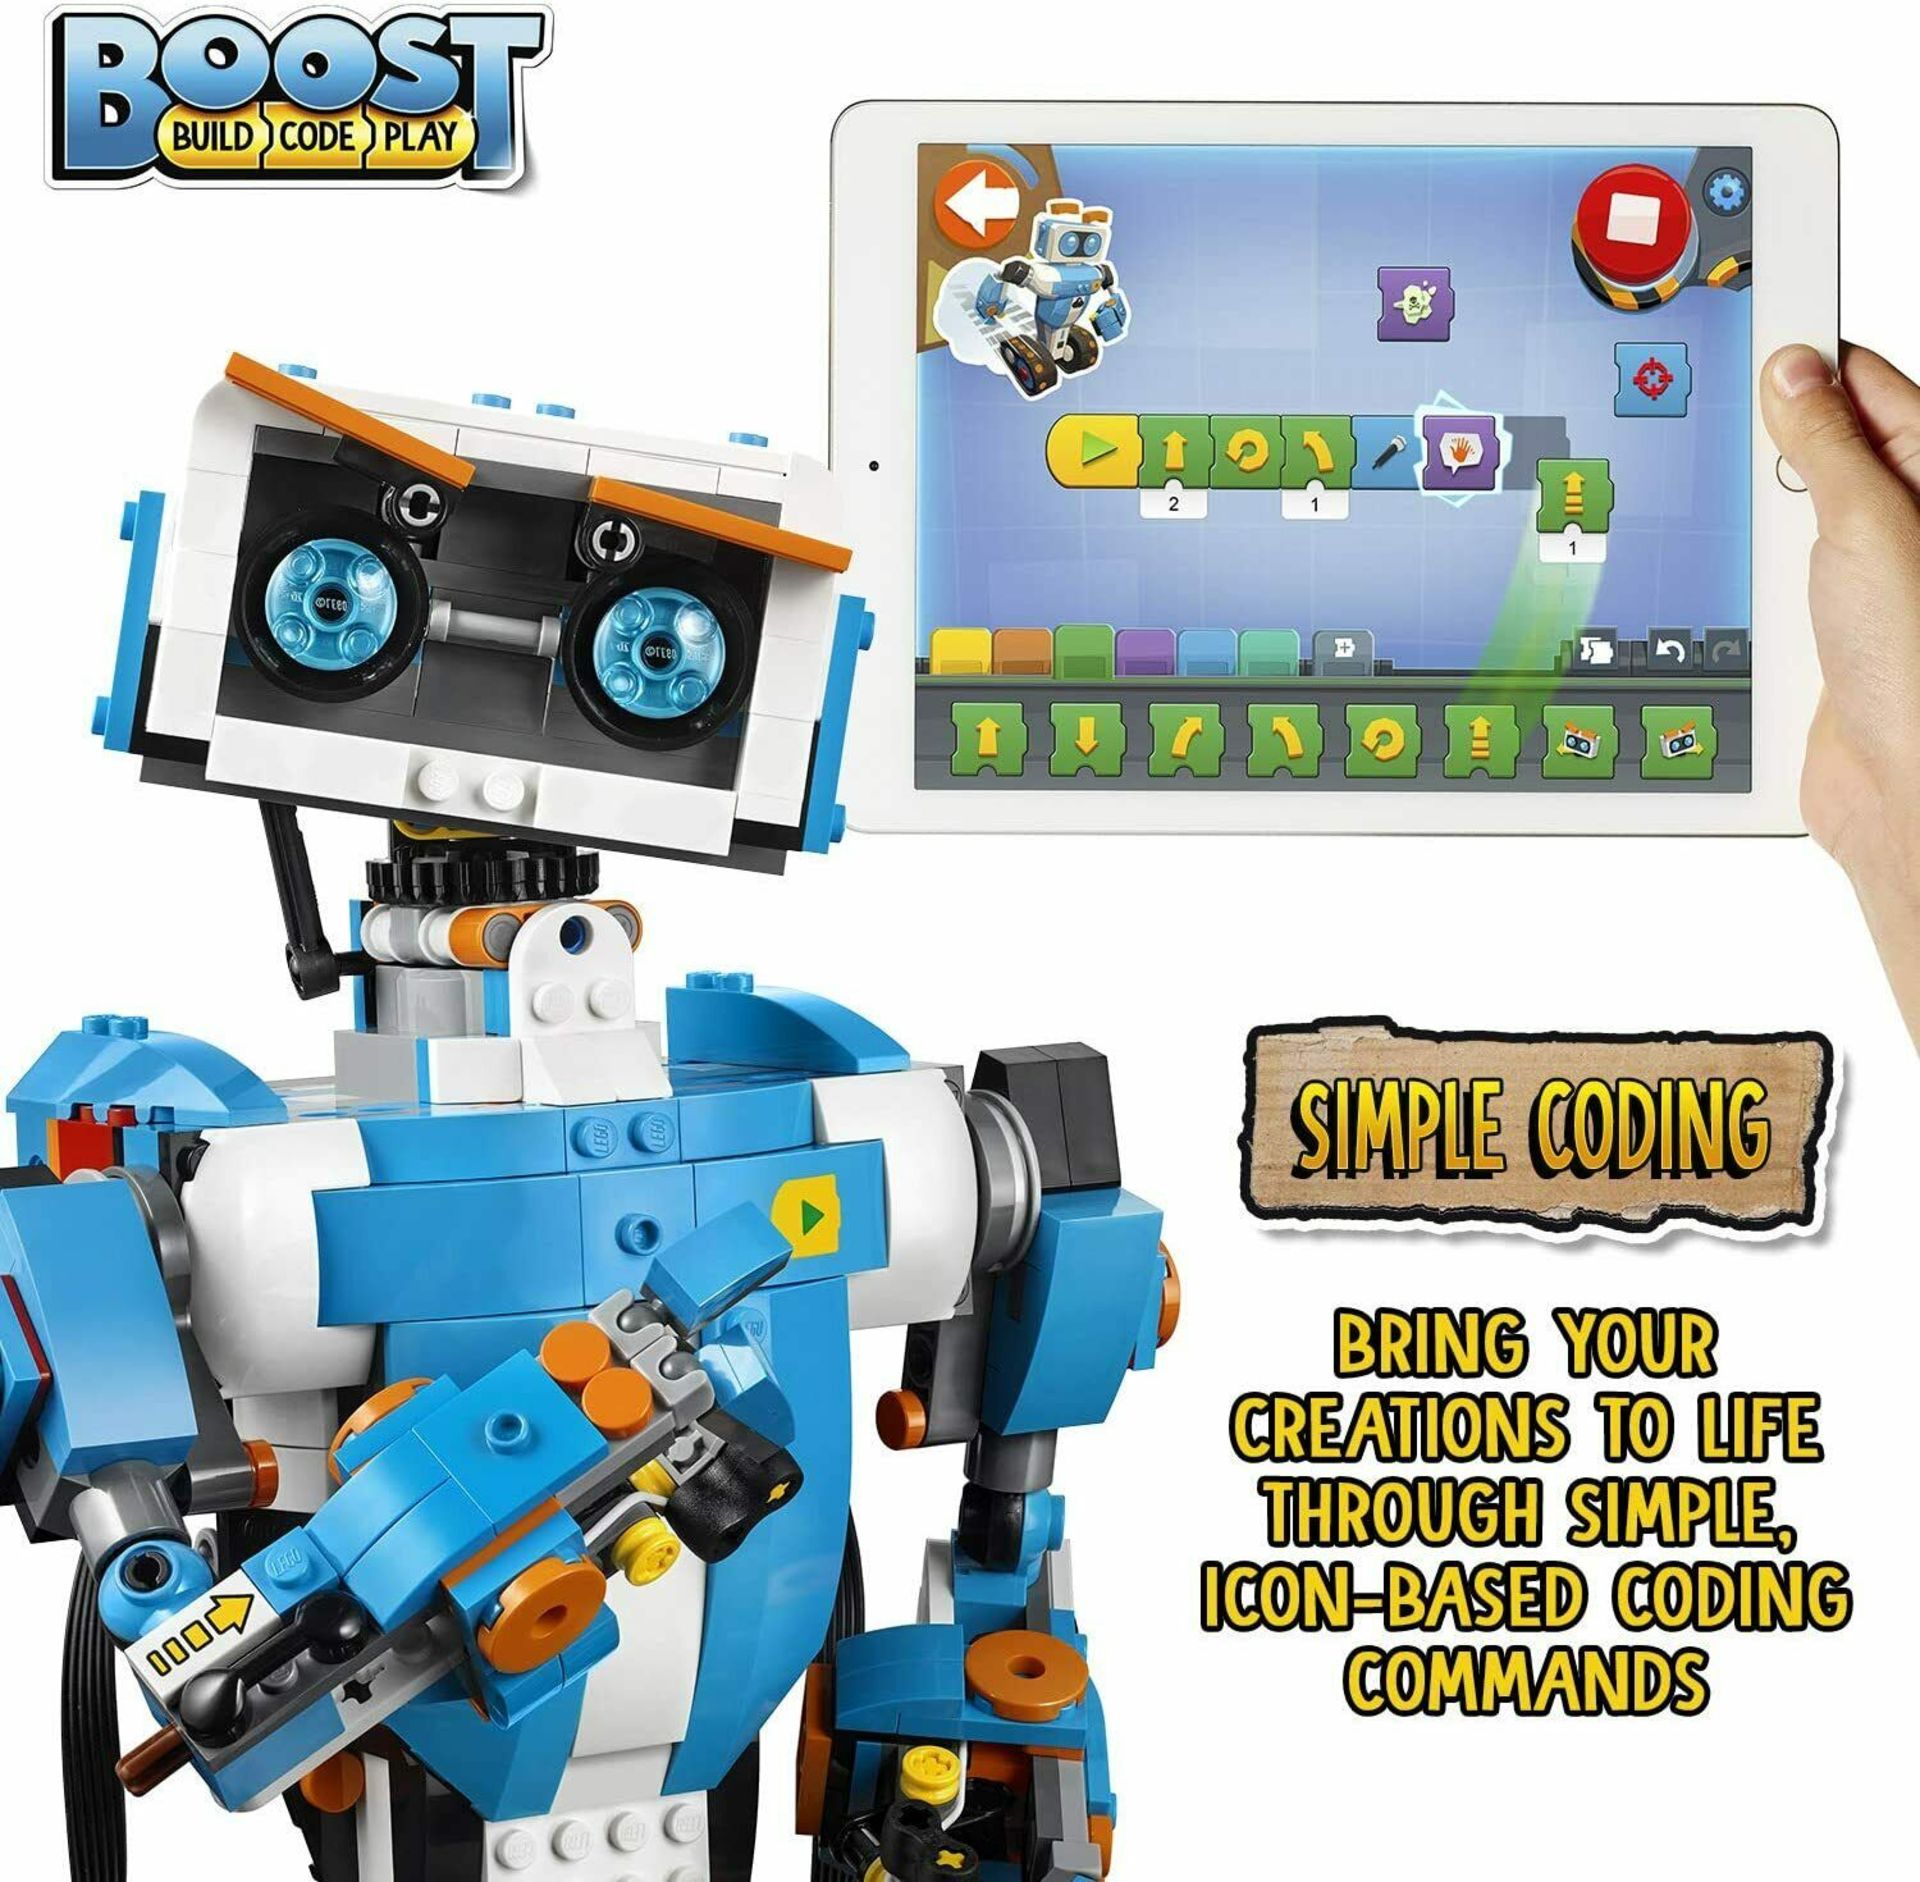 1 x Lego Boost 17101 Creative Toolbox - Build, Code and Play - 5 in 1 Robotics Lego Kit - Unused and - Image 6 of 6